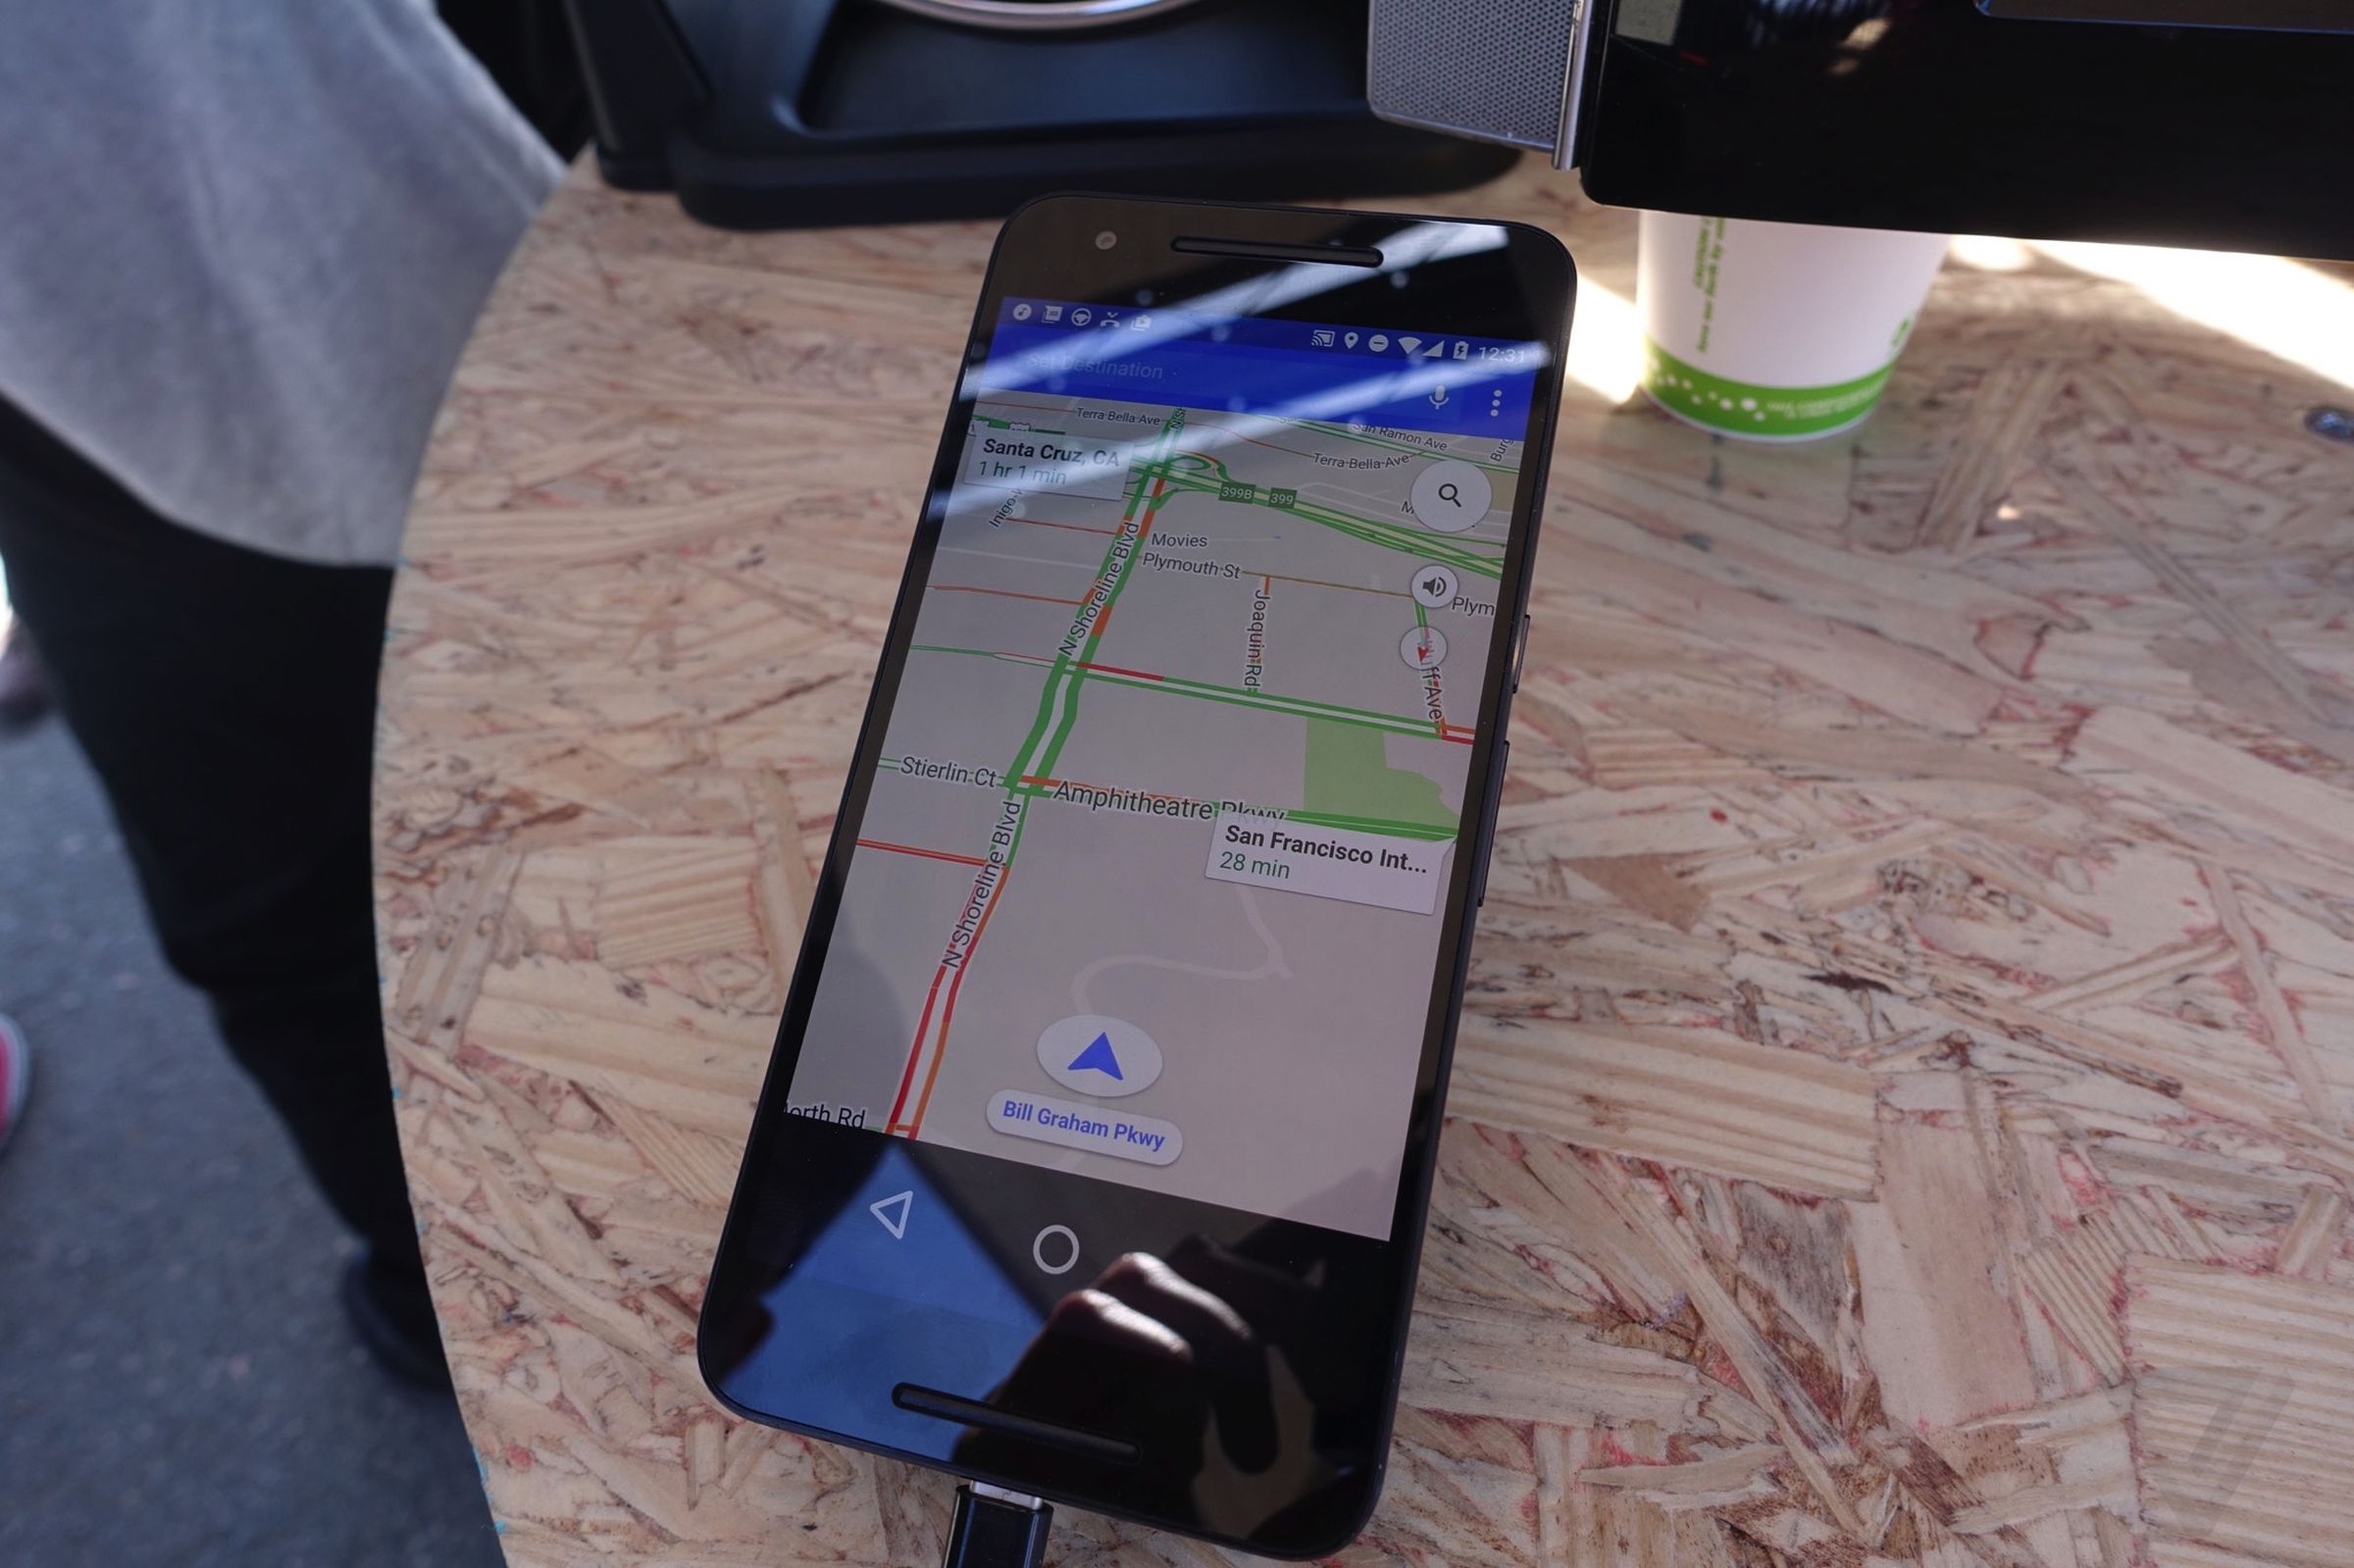 Android Auto on a phone: hands on photos